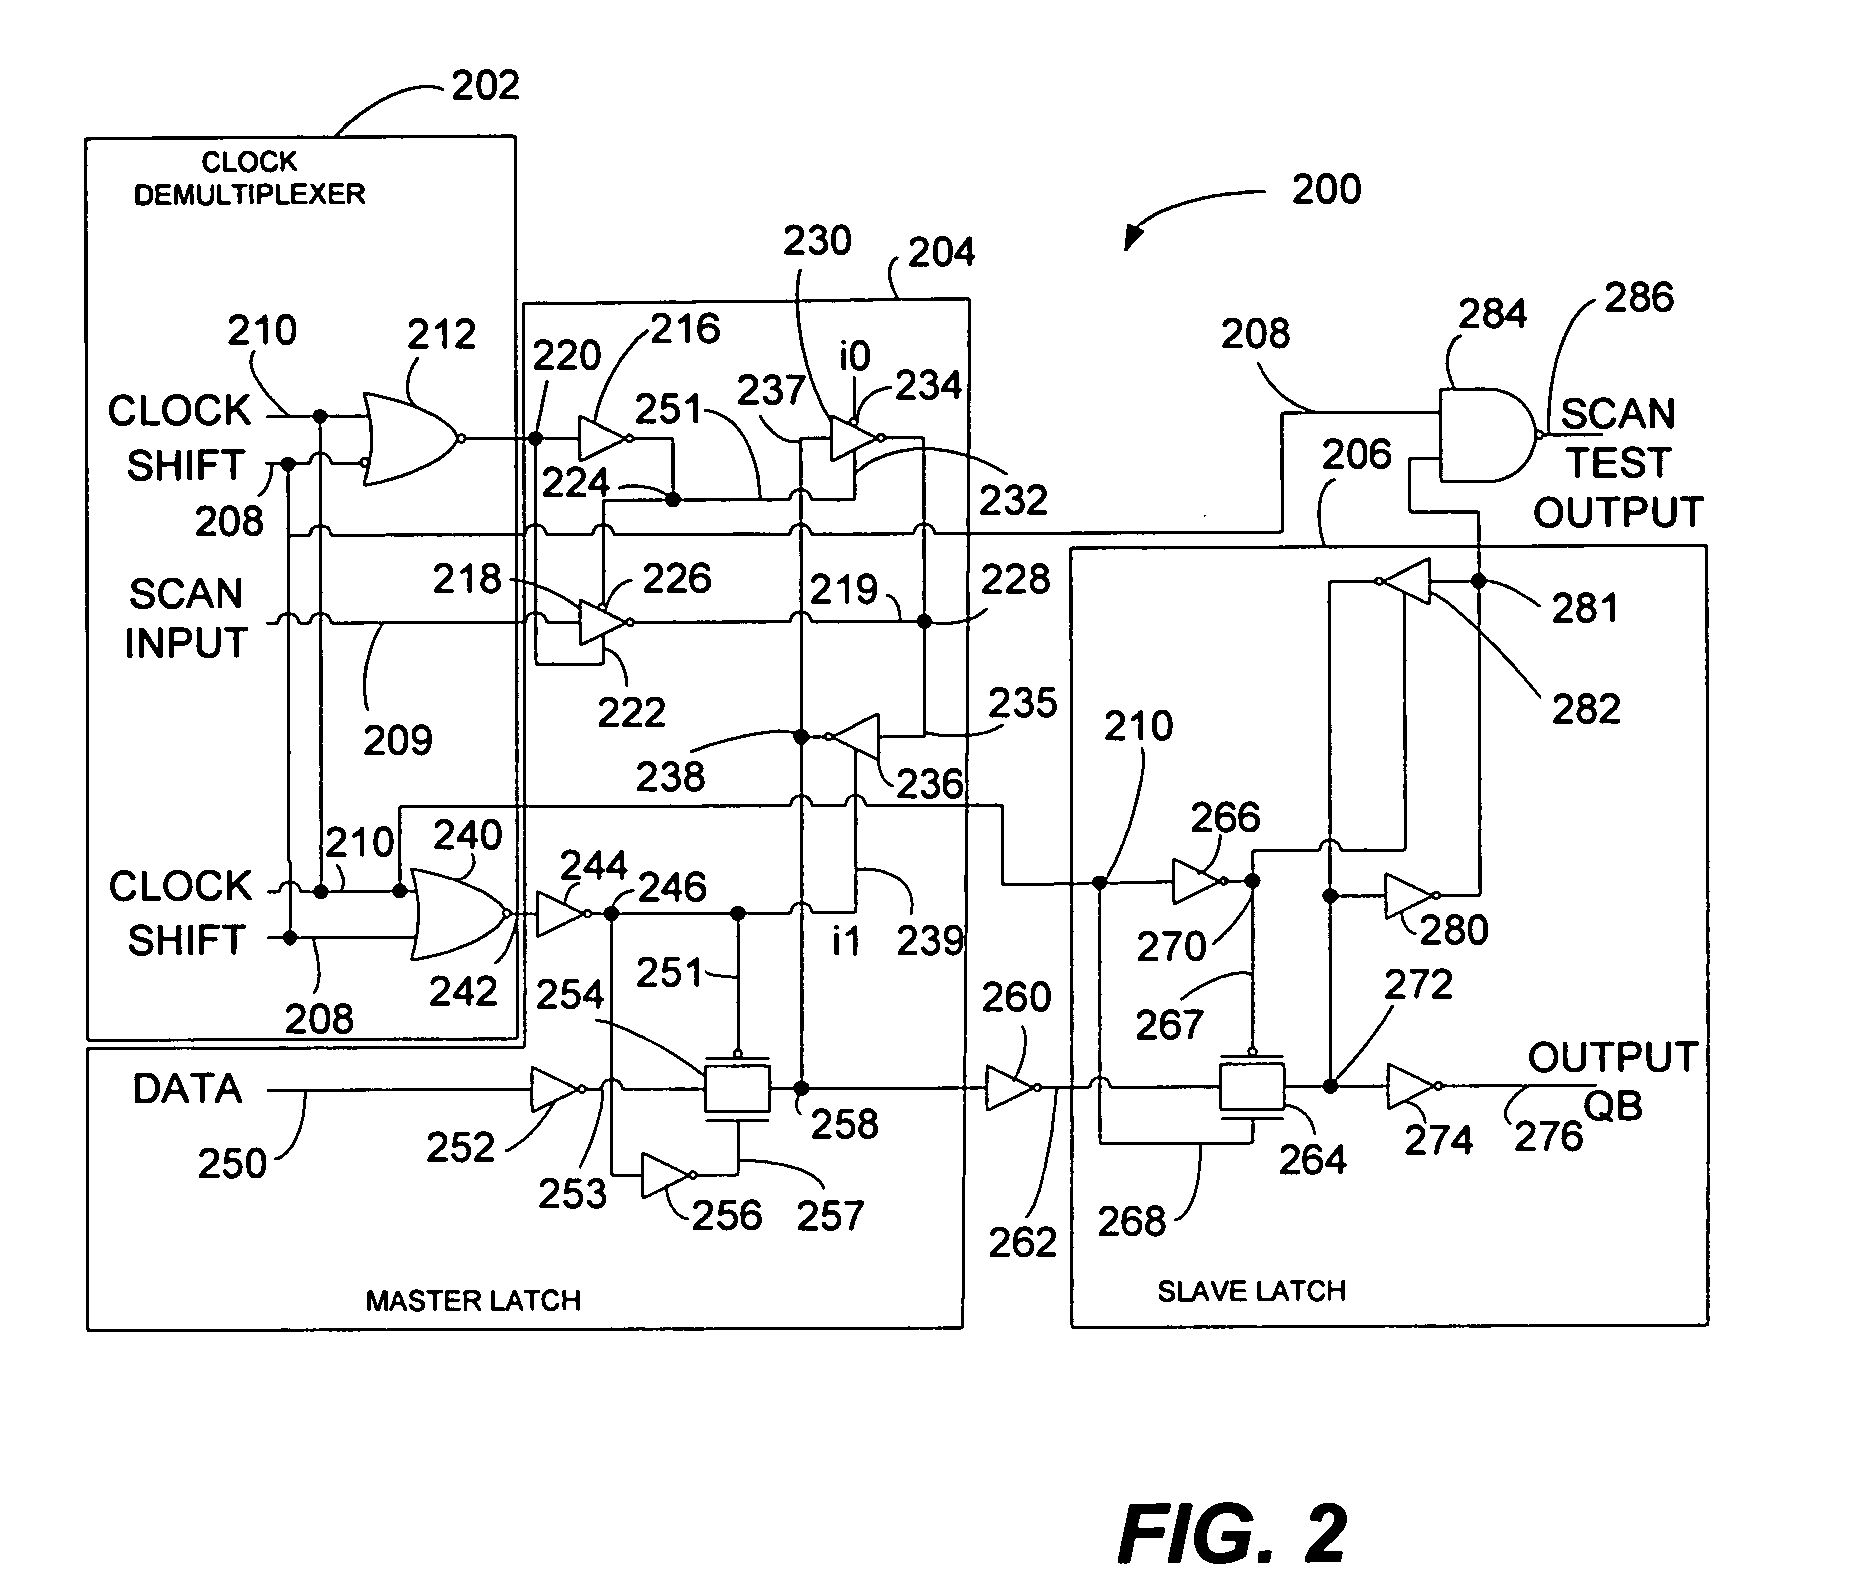 Logic device and method supporting scan test